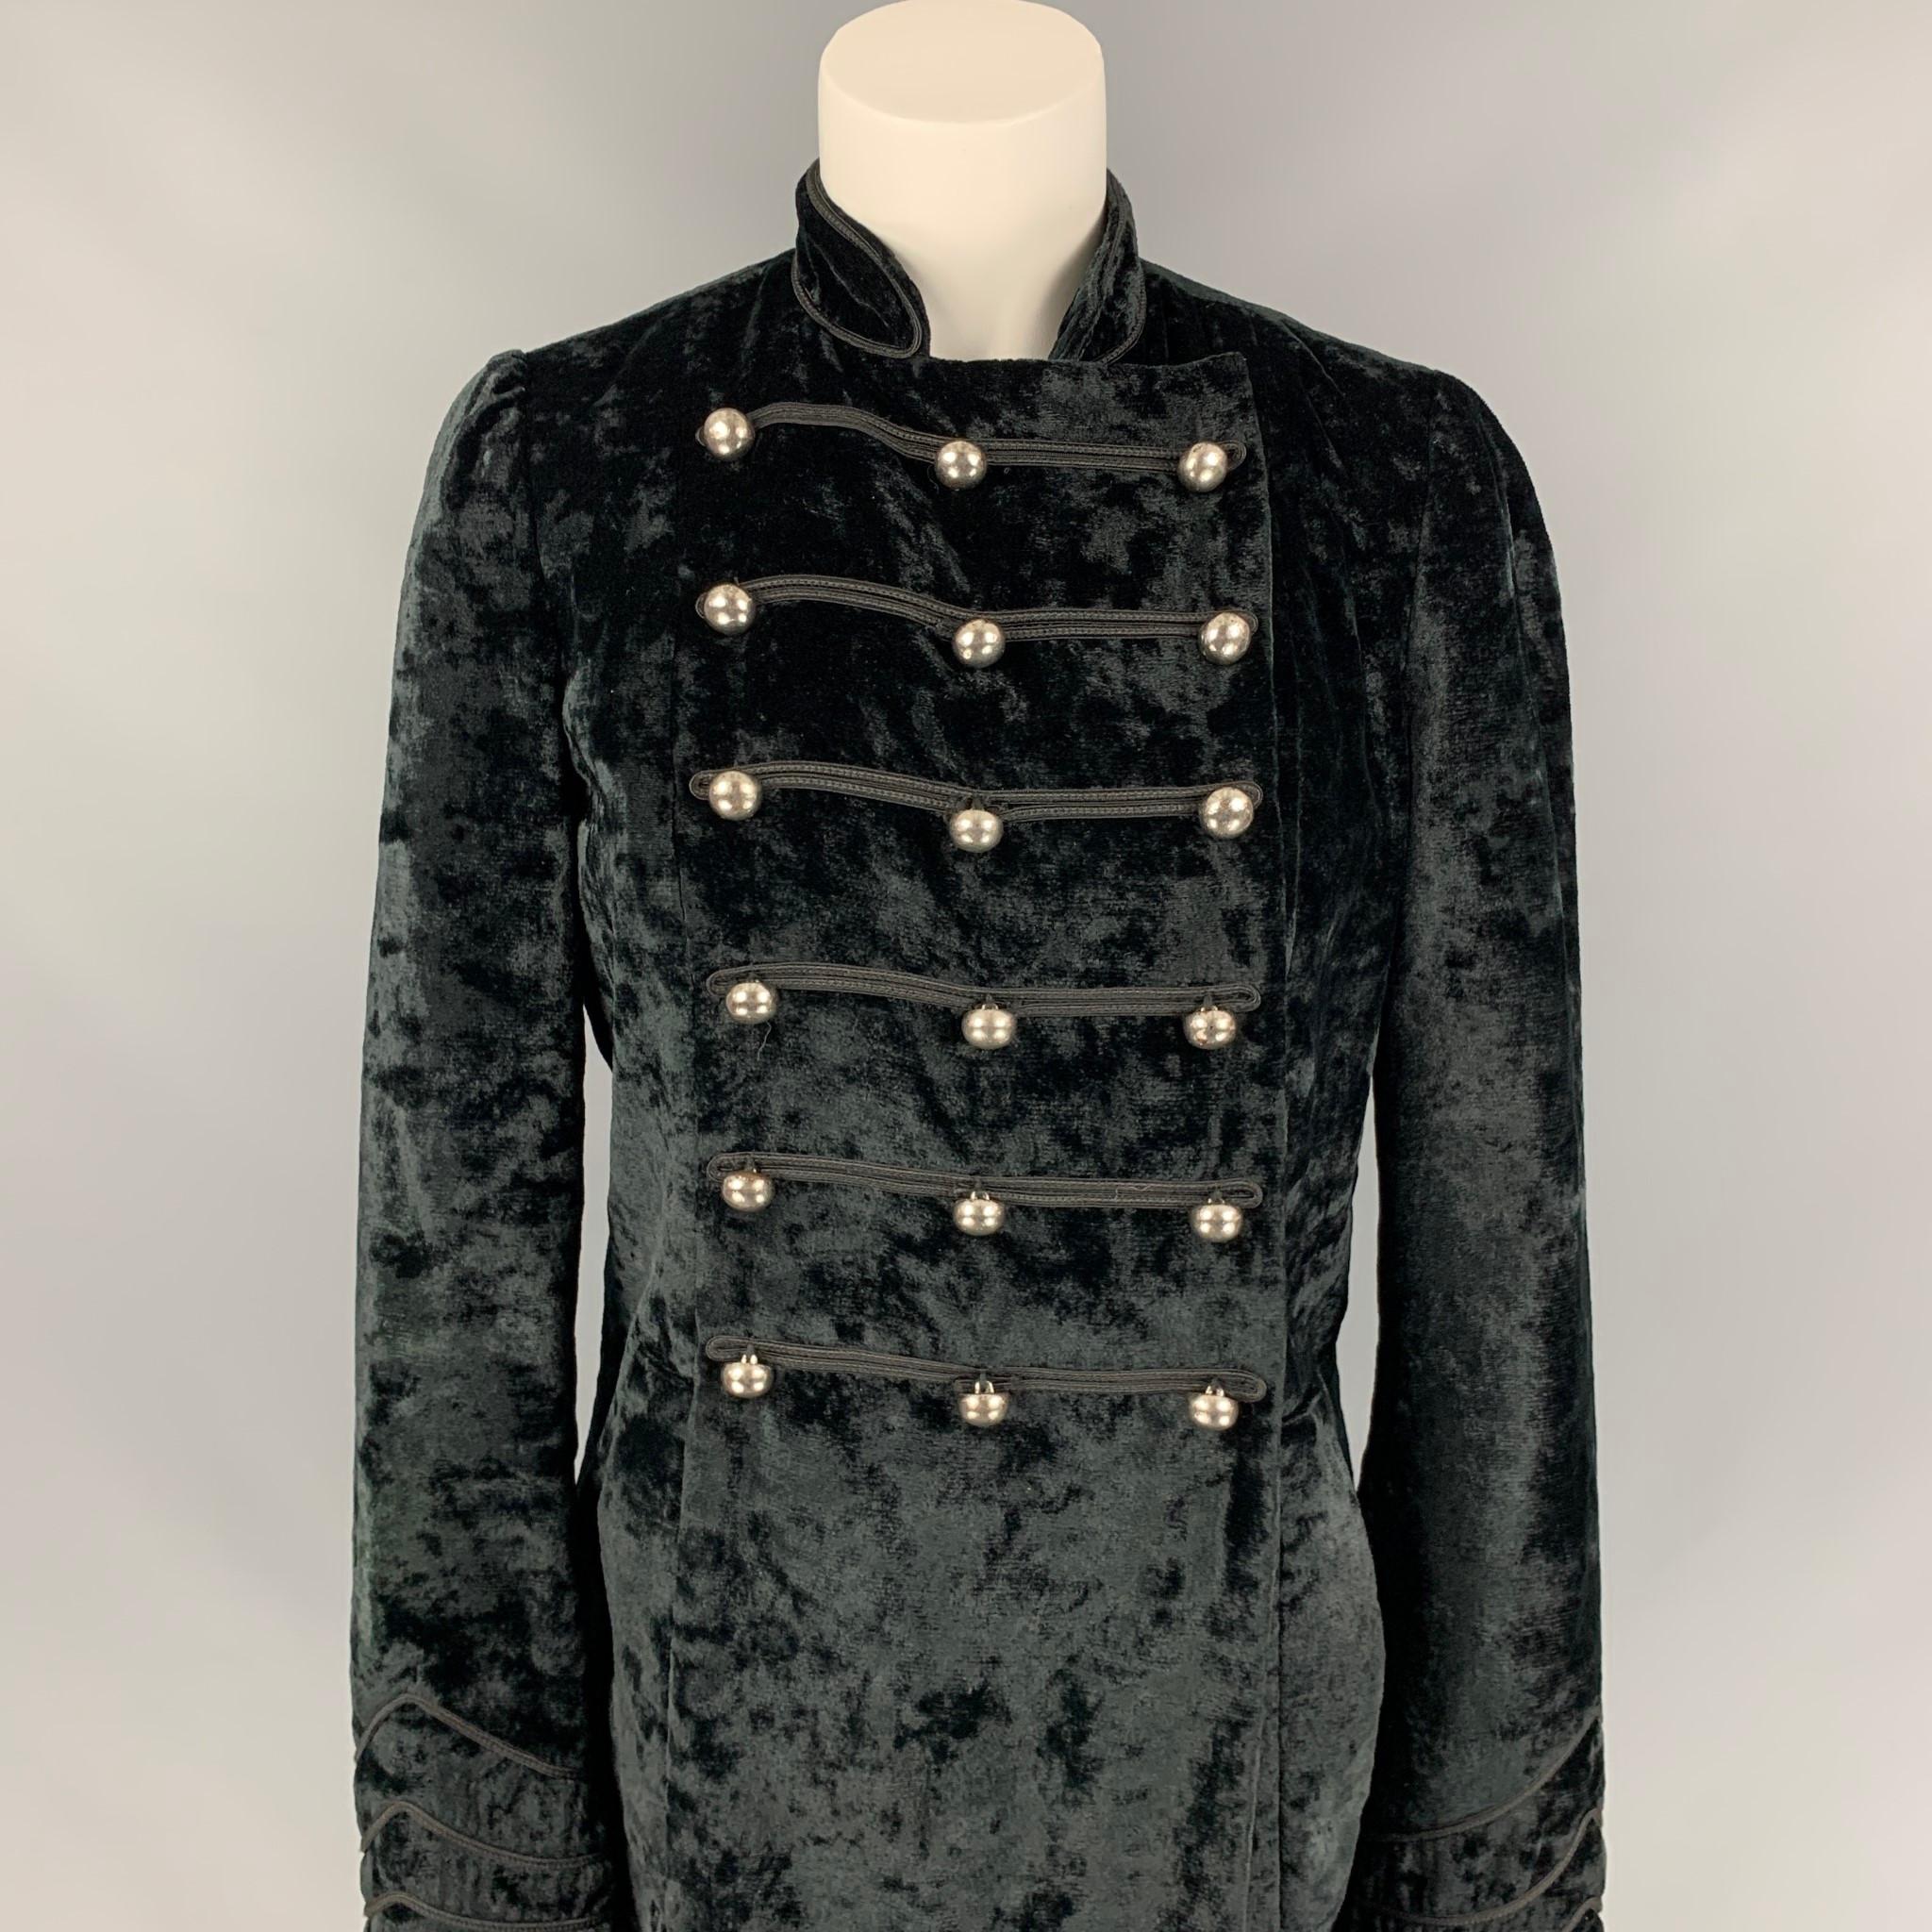 MARC by MARC JACOBS coat comes in a black velvet rayon / polyester featuring a stand up collar, back strap, silver tone metal buttons, slit pockets, and a double breasted closure. 

Very Good Pre-Owned Condition.
Marked: S

Measurements:

Shoulder: